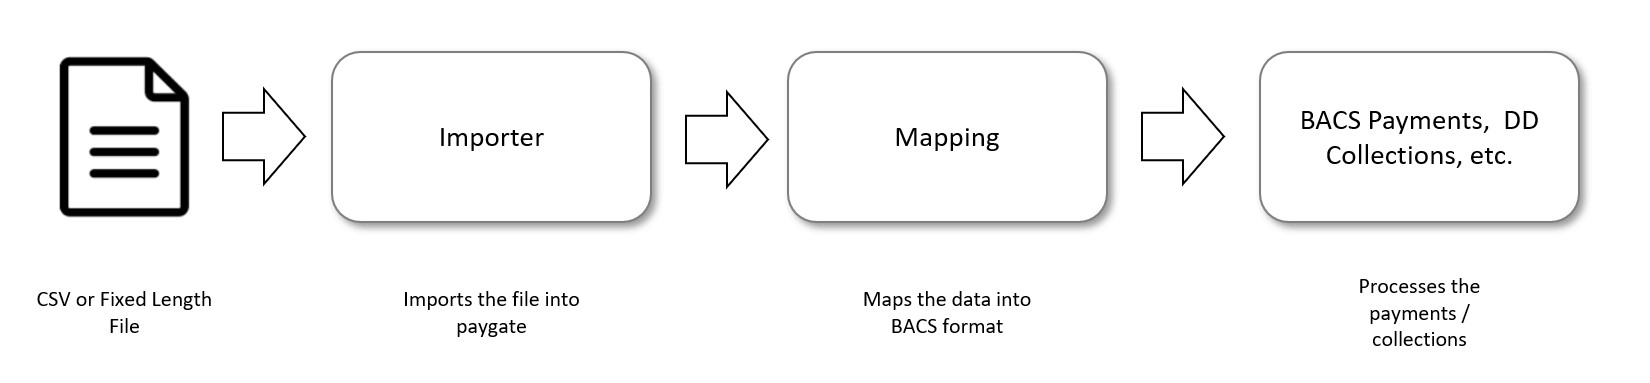 SubmisMapping